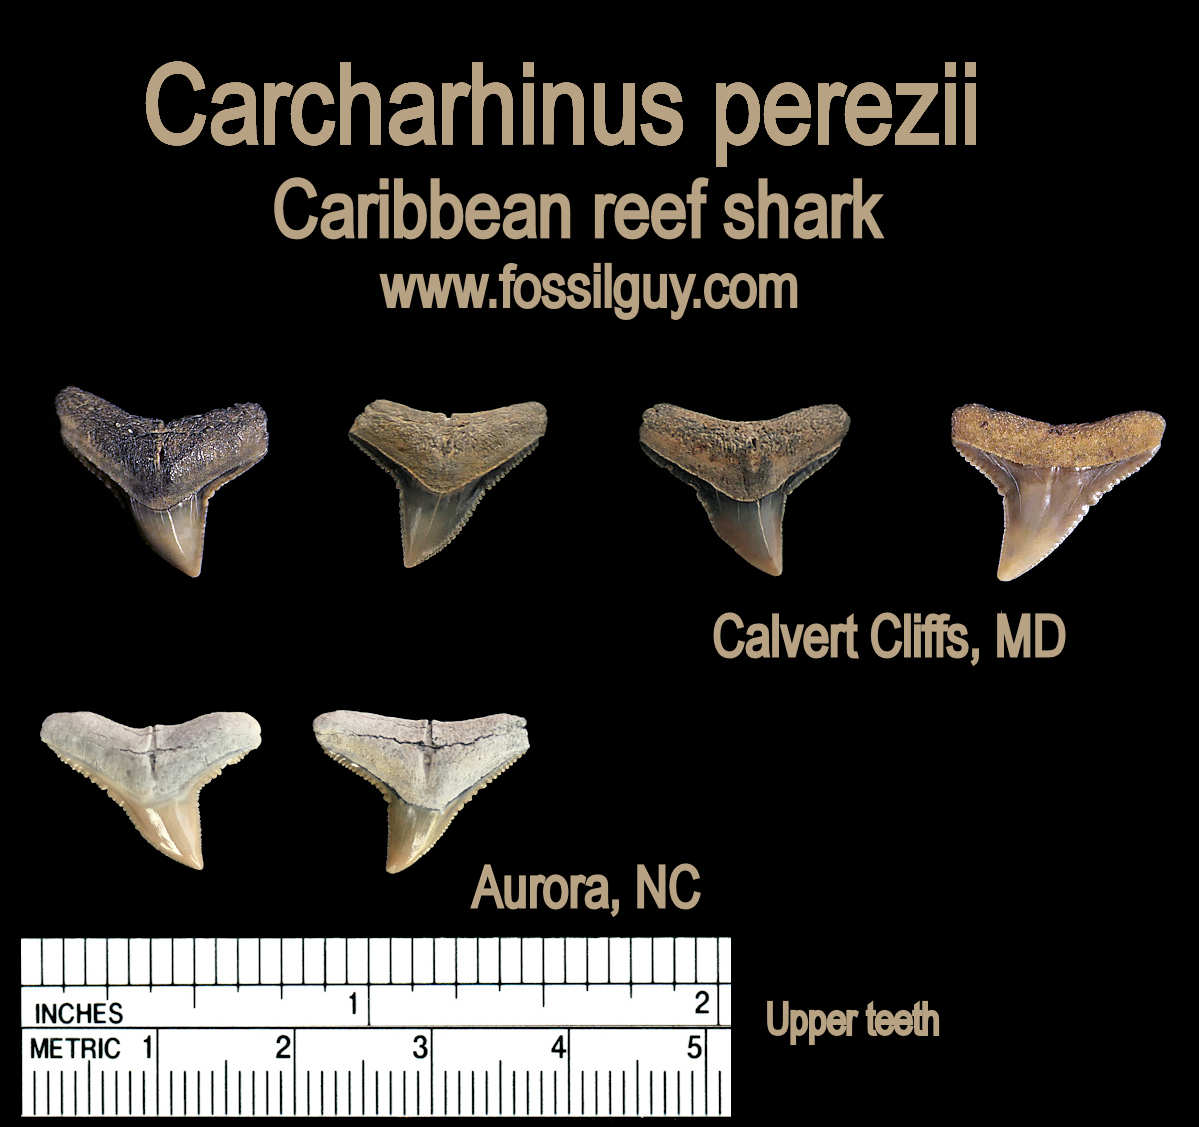 Carcharhinus perezii fossil shark teeth from the Calvert Cliffs of MD and Aurora, NC